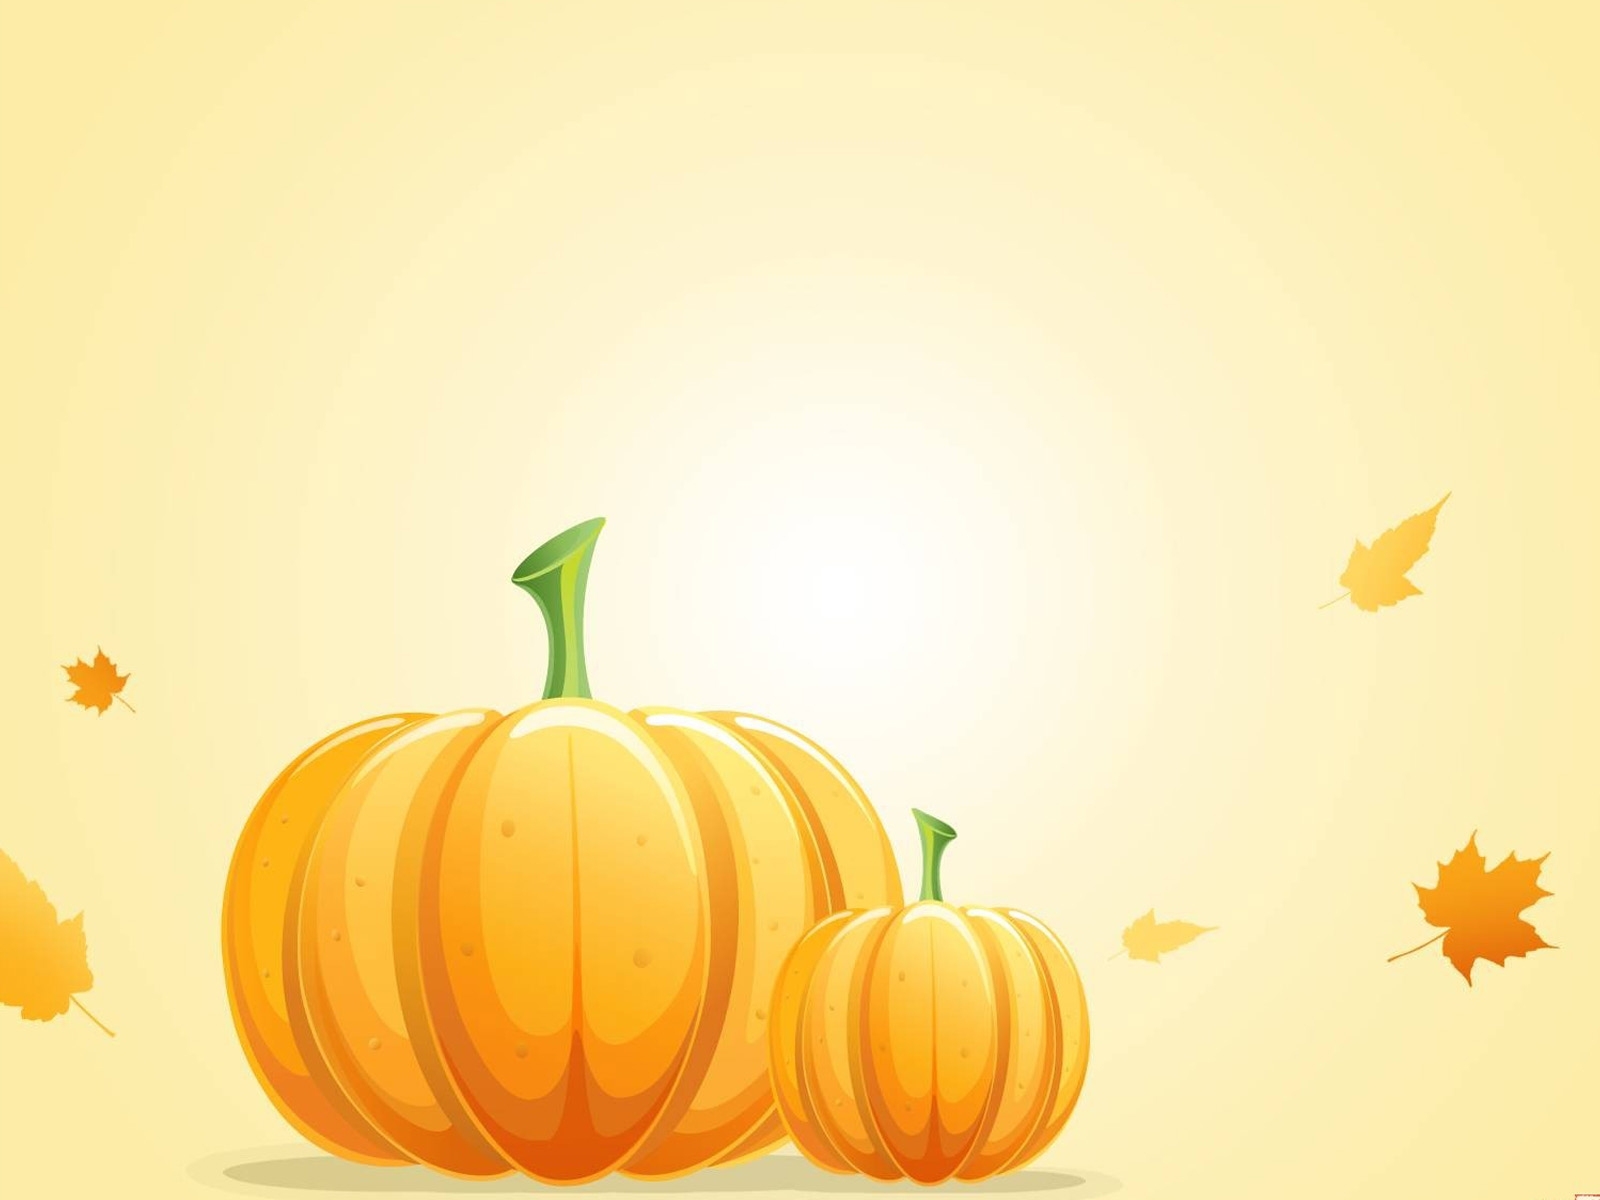 [72+] Pumpkin Backgrounds Free On Wallpapersafari Intended For Free Fall Powerpoint Templates